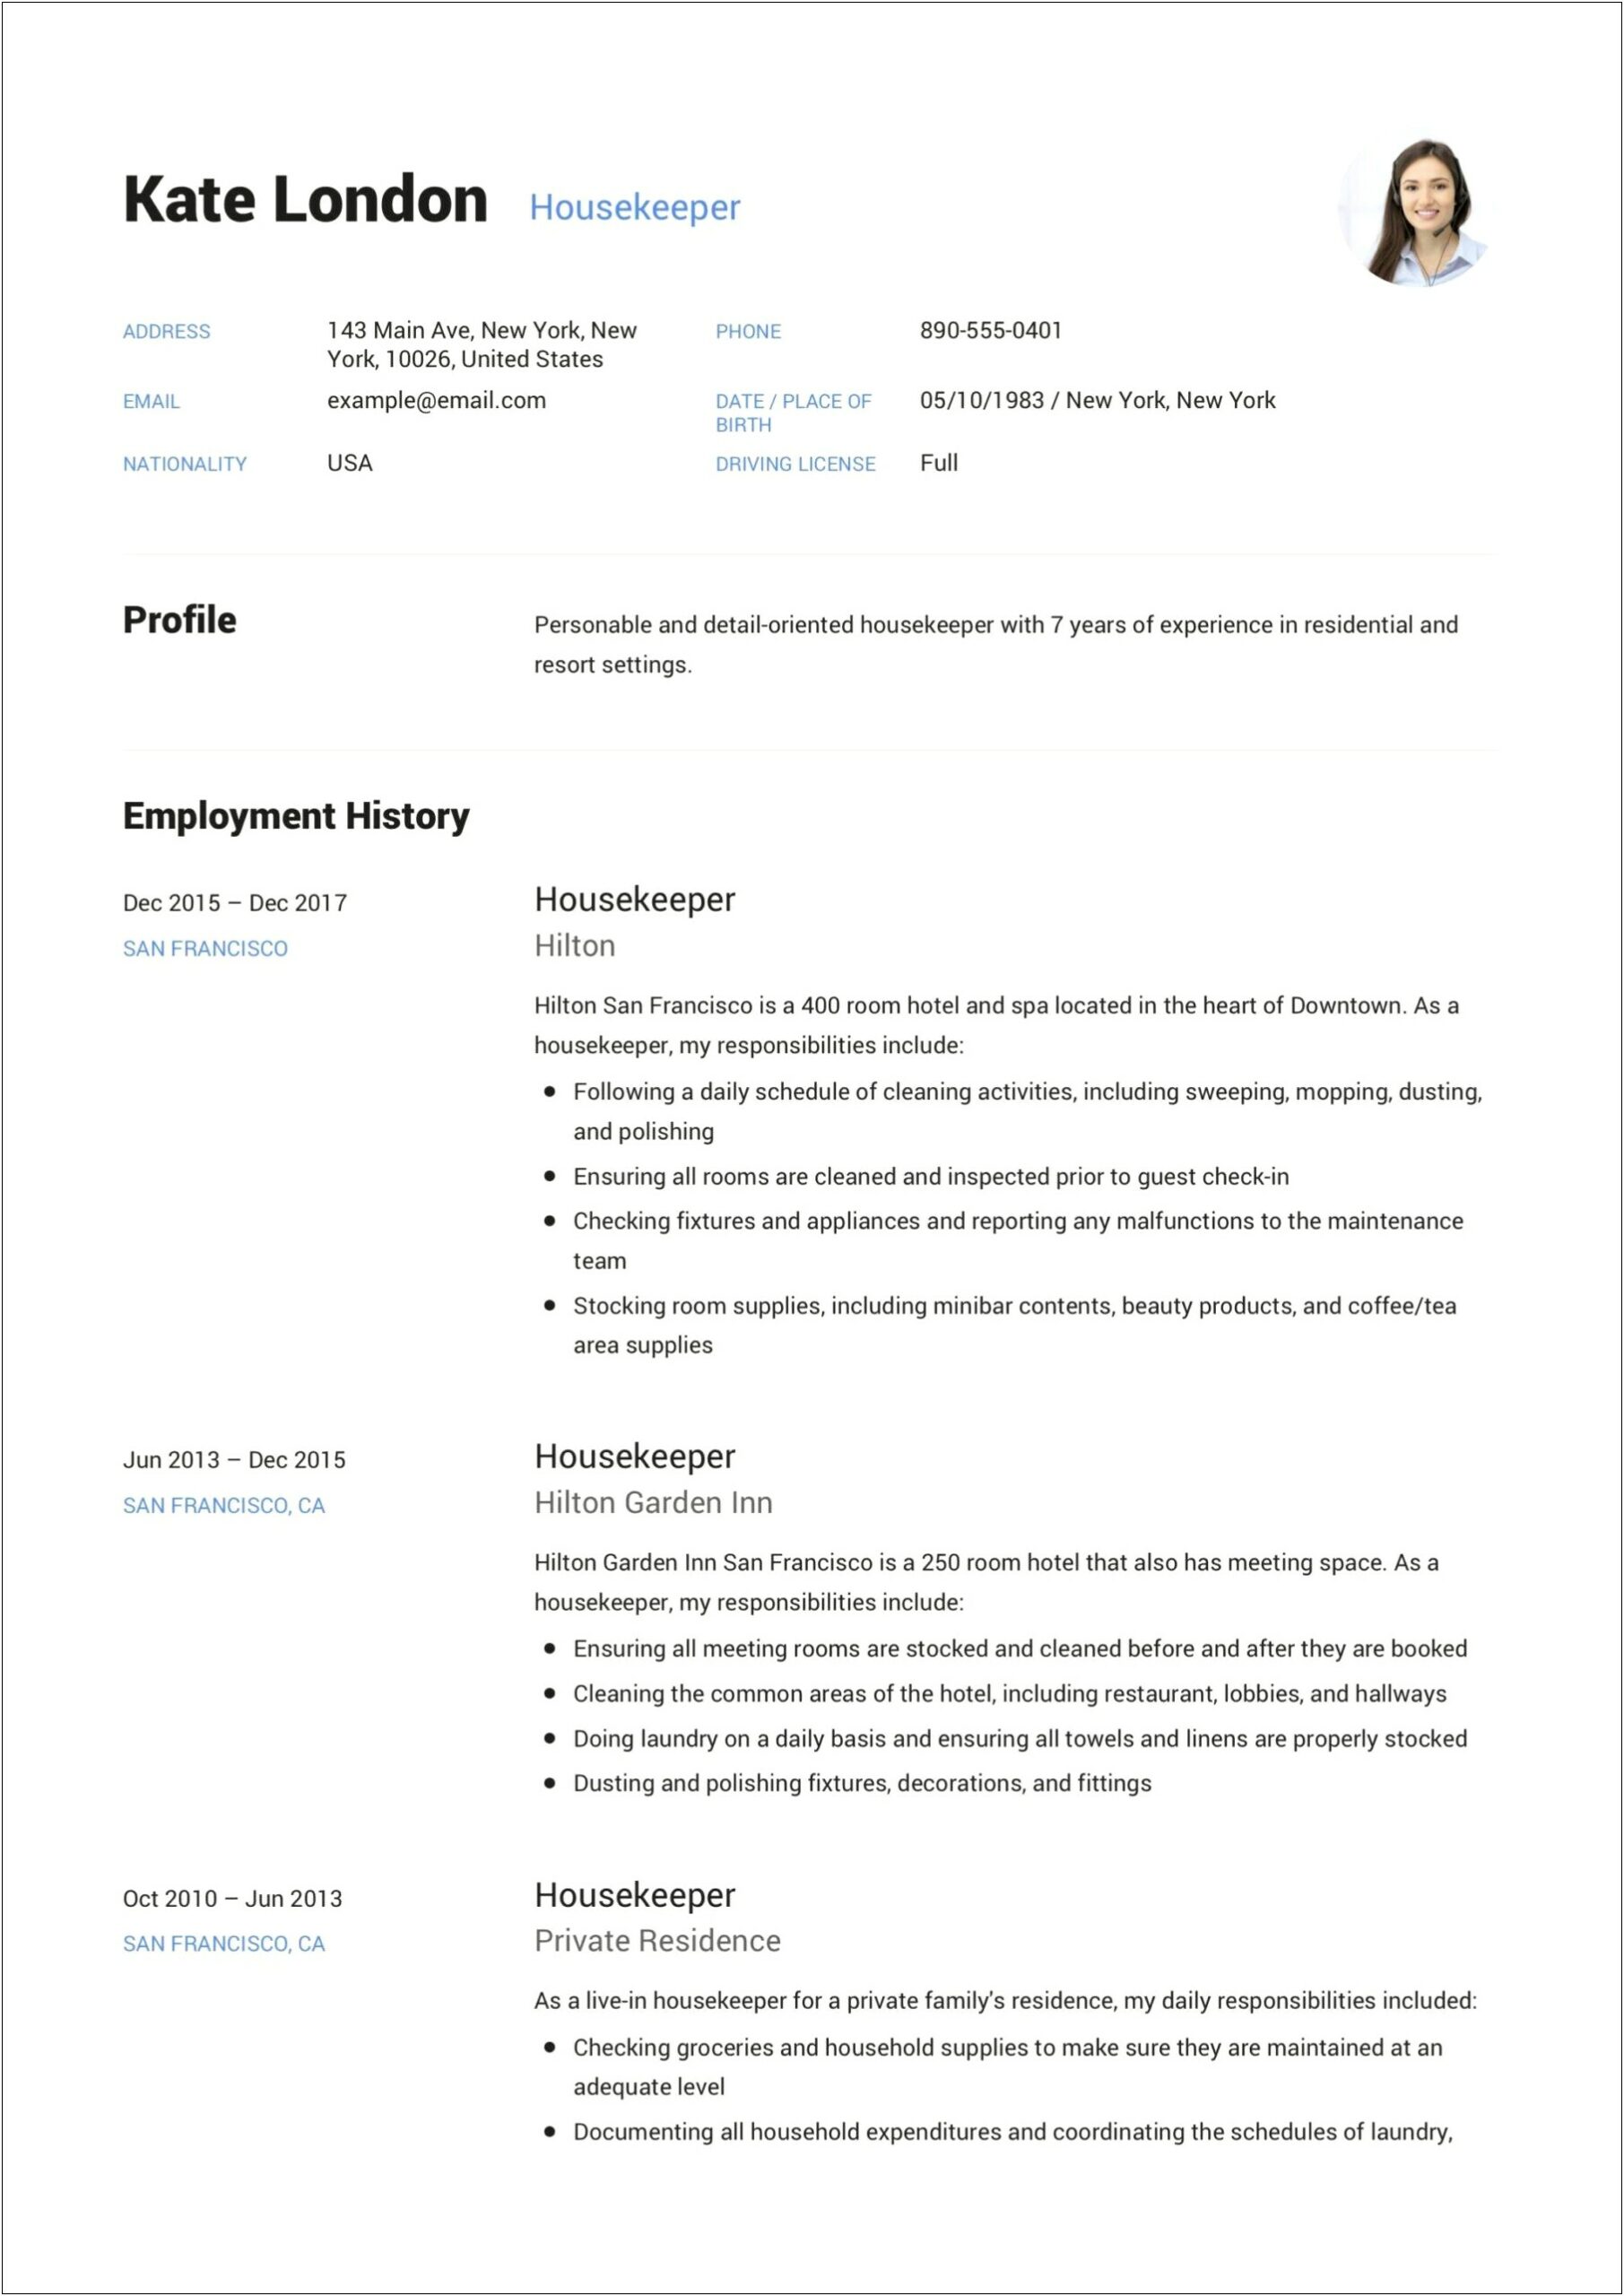 Resume Objective For A Housekeeper